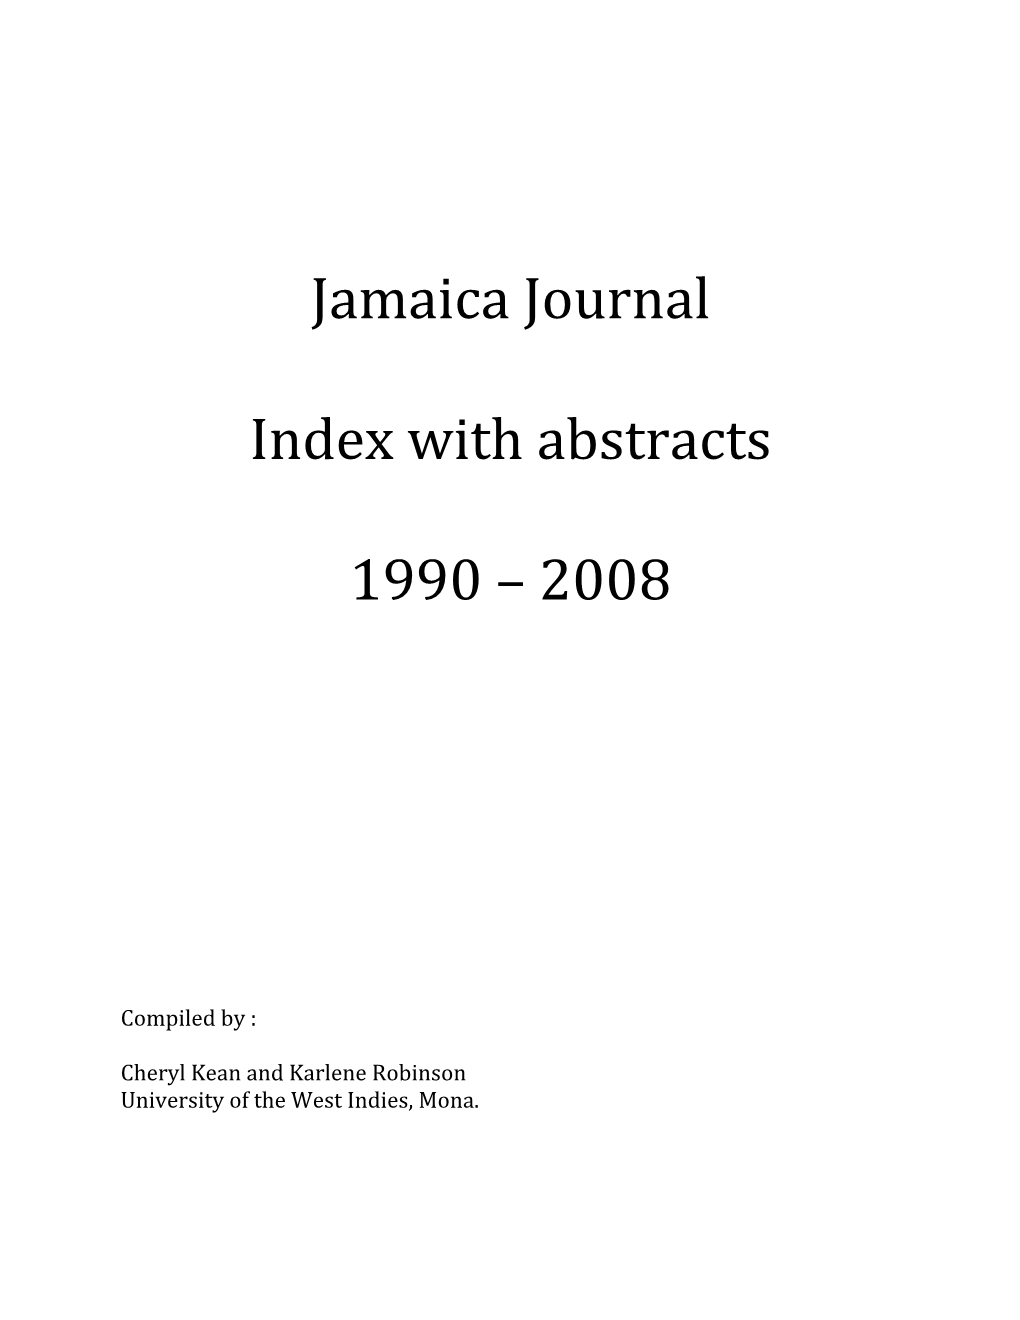 Jamaica Journal Index with Abstracts 1990 – 2008